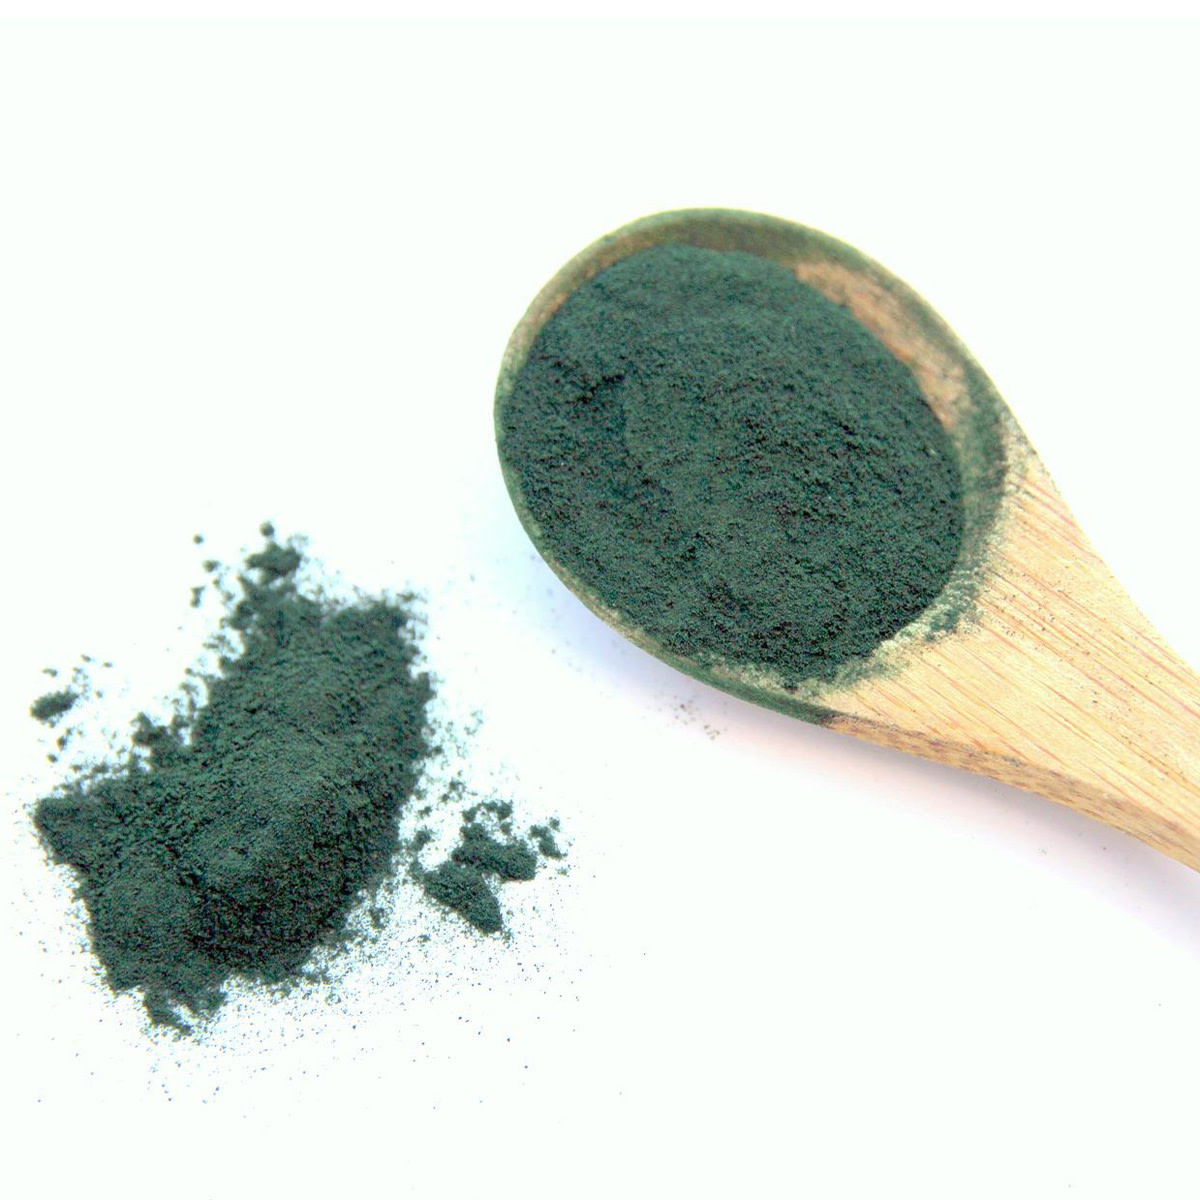 Spirulina is an amazing source of protein.